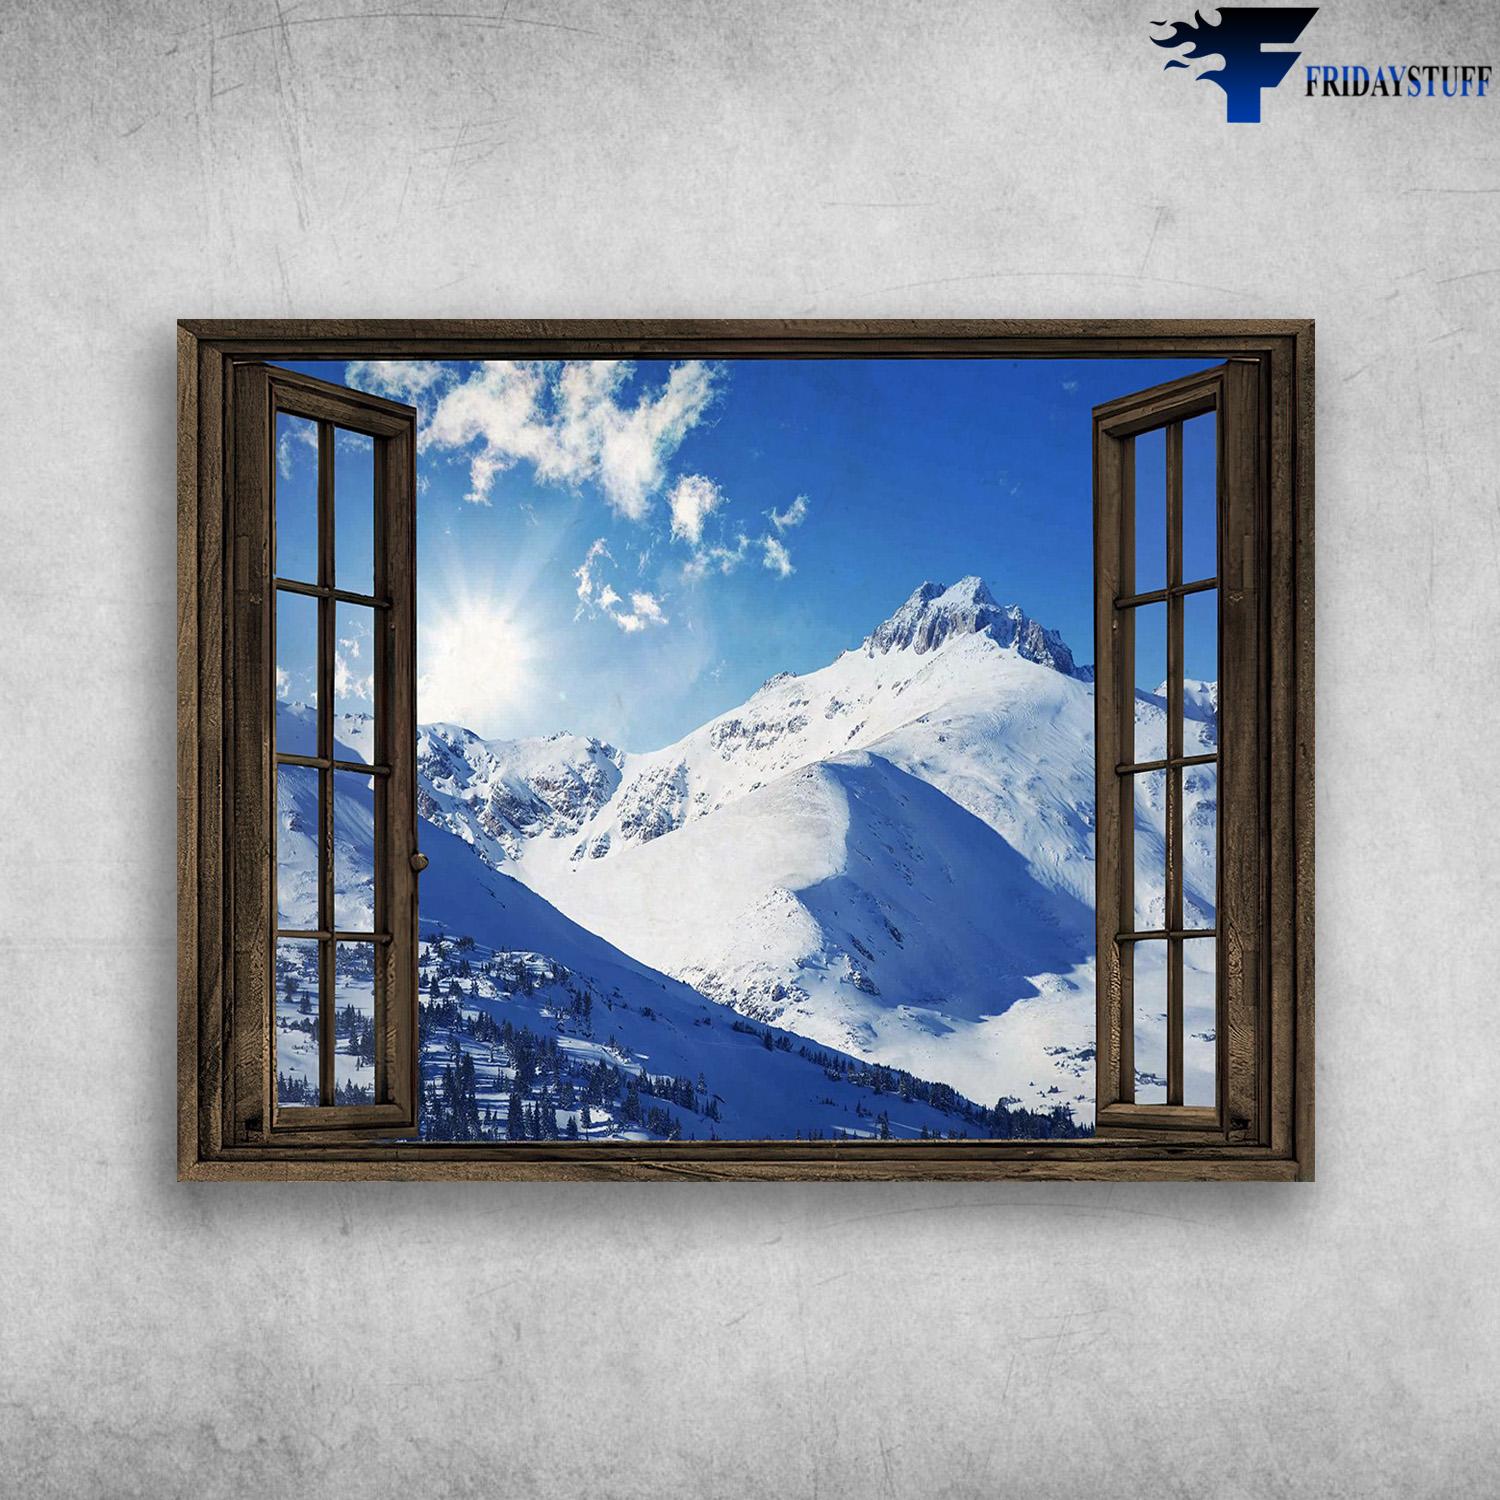 Skiing Poster, Skiing Lover, Snow Mountain, Wall Art Poster